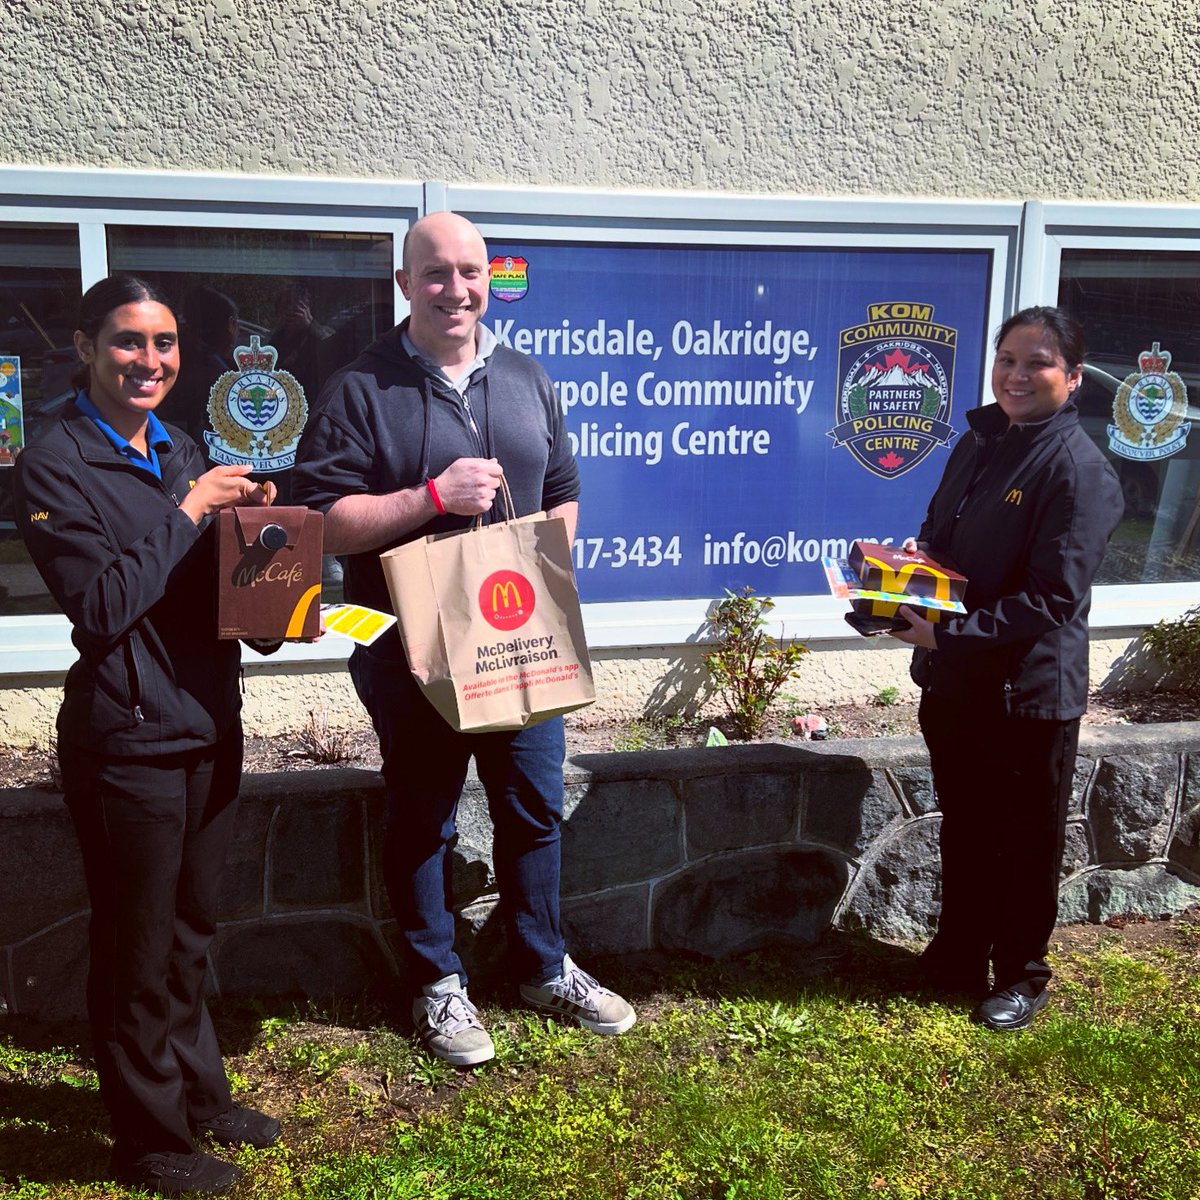 A big #THANKYOU to the #Kerrisdale #McDonalds crew! This week they #surprised the #KOMCPC team with lots of #SweetTreats & #coffee! 😃☕️🍩🫶🏻🙏🏽

#CommunityPartners #RandomActsOfKindness #Volunteers #HelpingOthers #VanCommunityPolicing #CakeMakesEverythingBetter #VPD